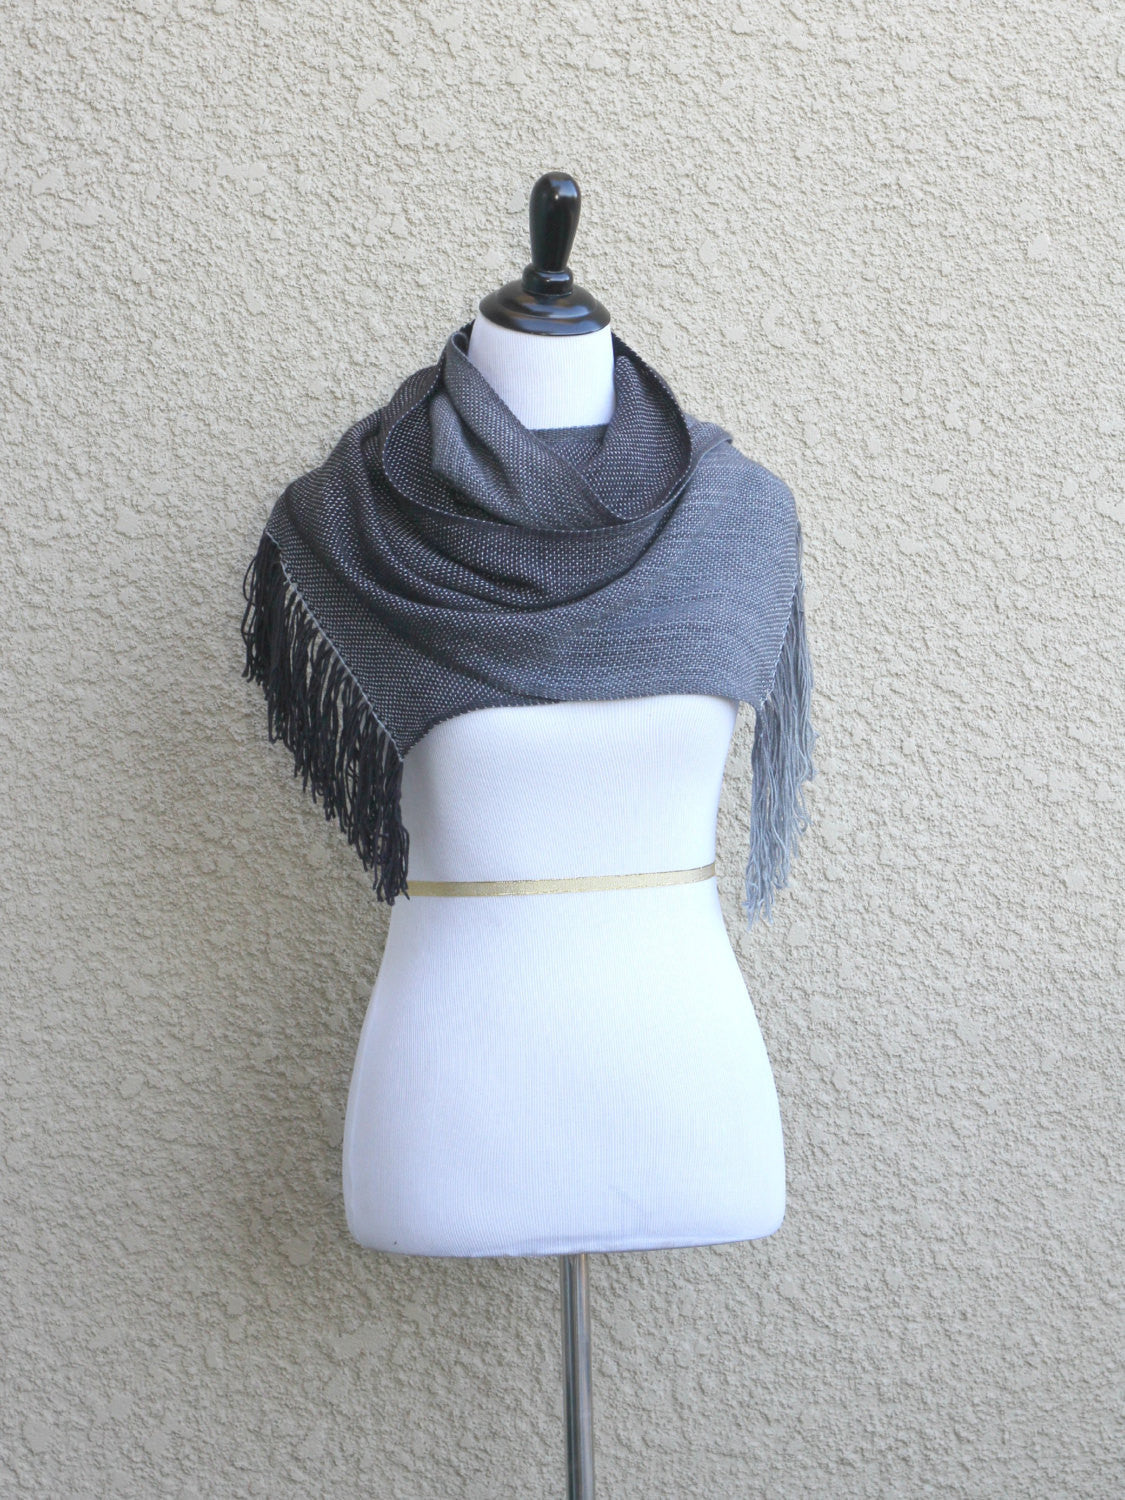 Grey and black woven scarf